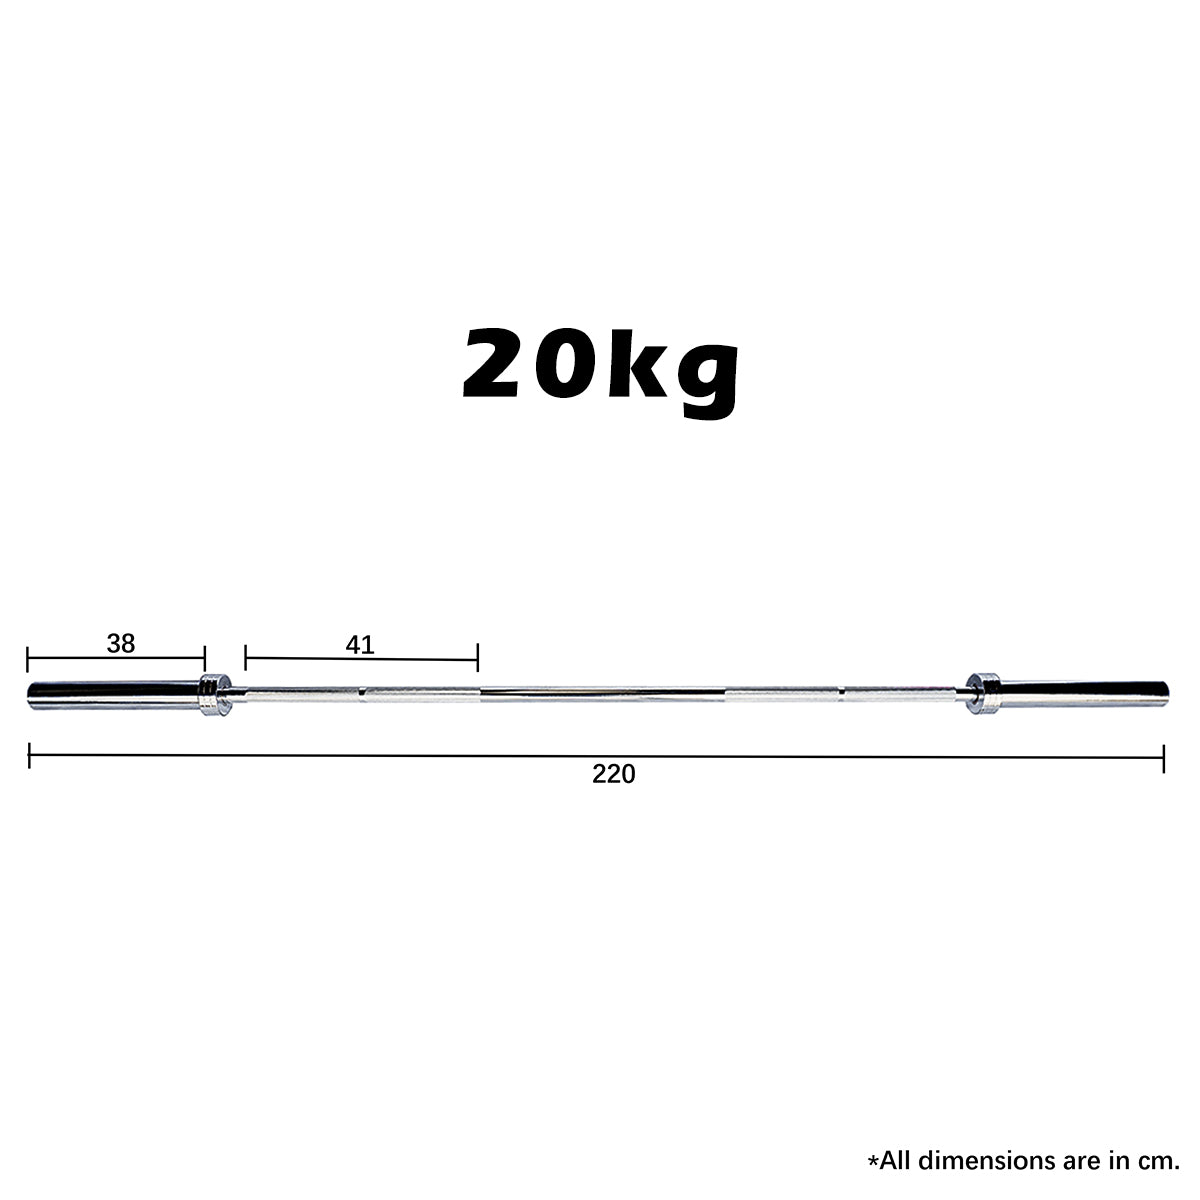 2.2m Silver Olympic 700lb Straight Barbell dimensions